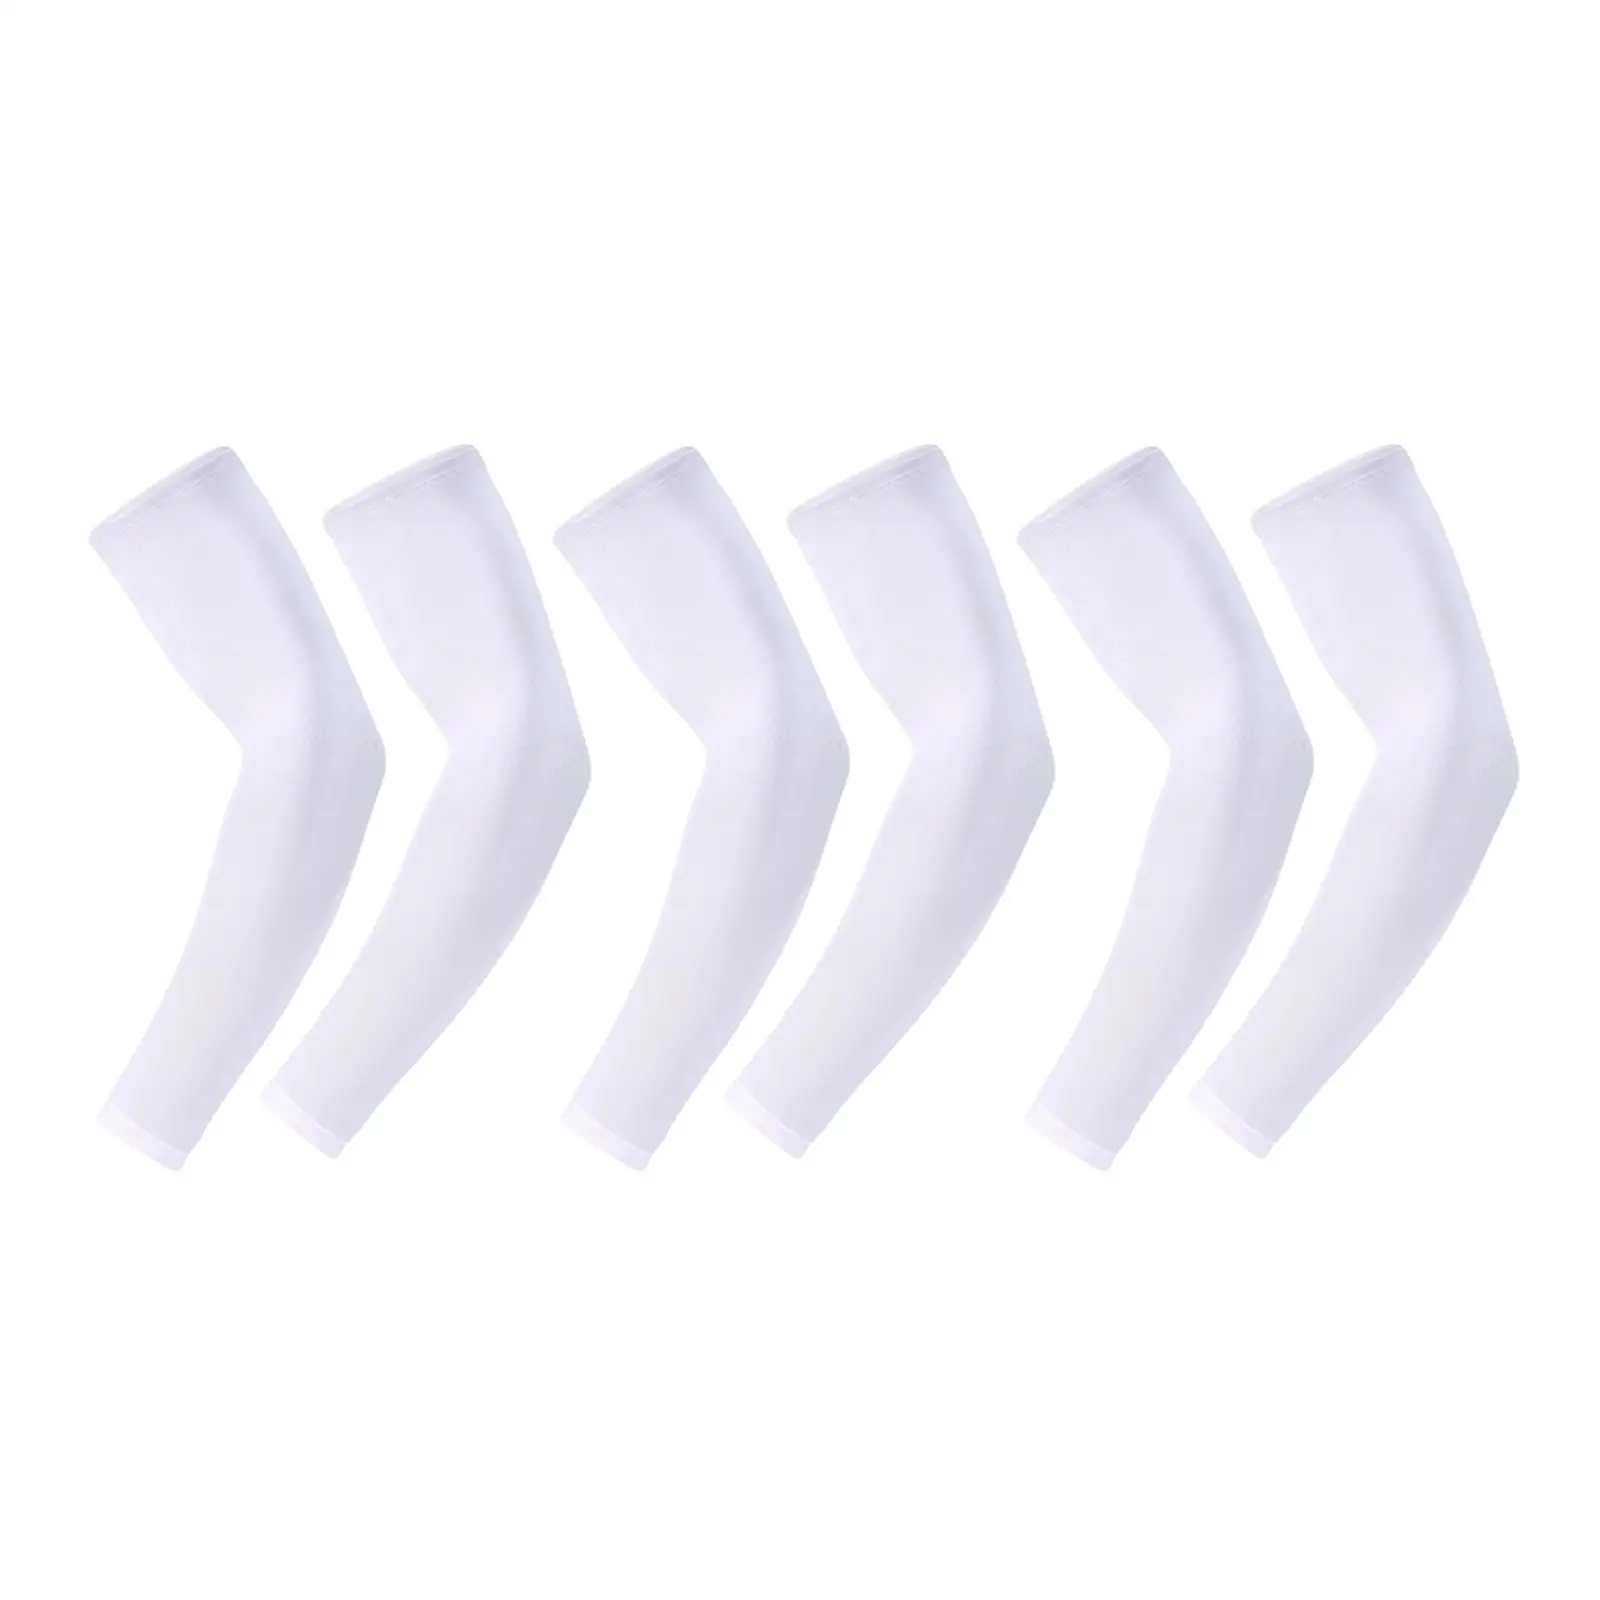 6Pcs Unisex Cooling Arm Sleeves Tattoo Cover up Camping UV Protection Sports for Outdoor Running Kids Football Tennis